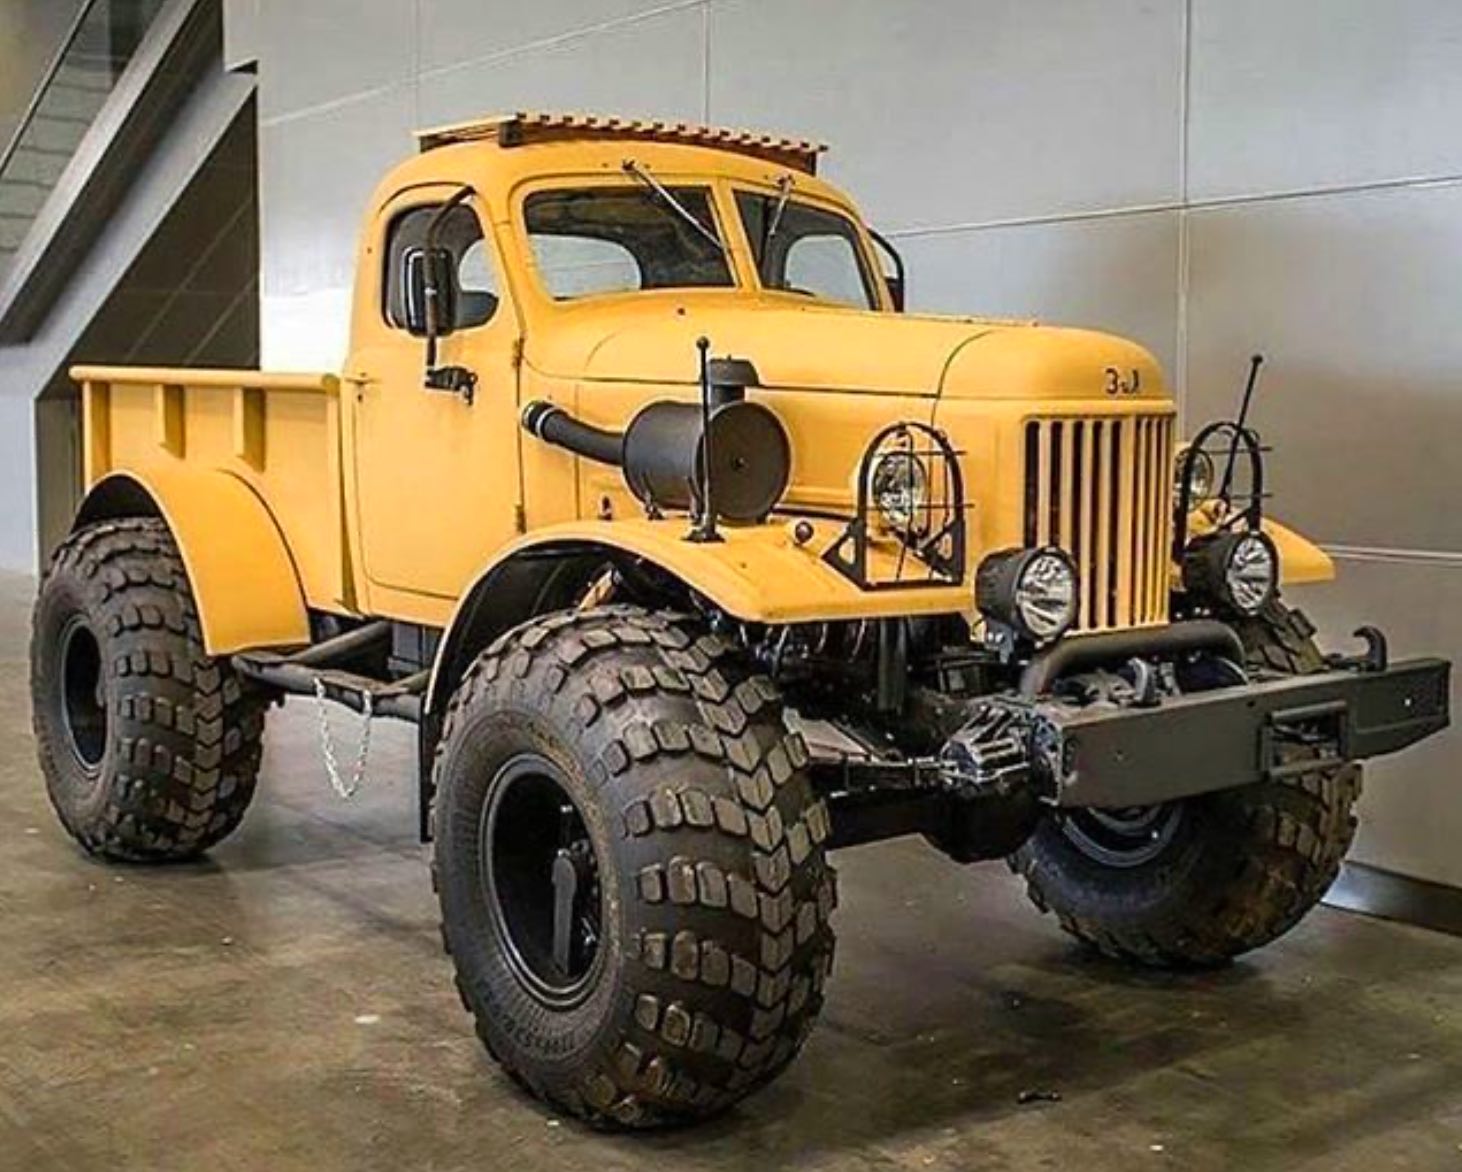 1946 Dodge Power Wagon - 10 Classic Trucks So Rare, Top Collectors Can't Find Them